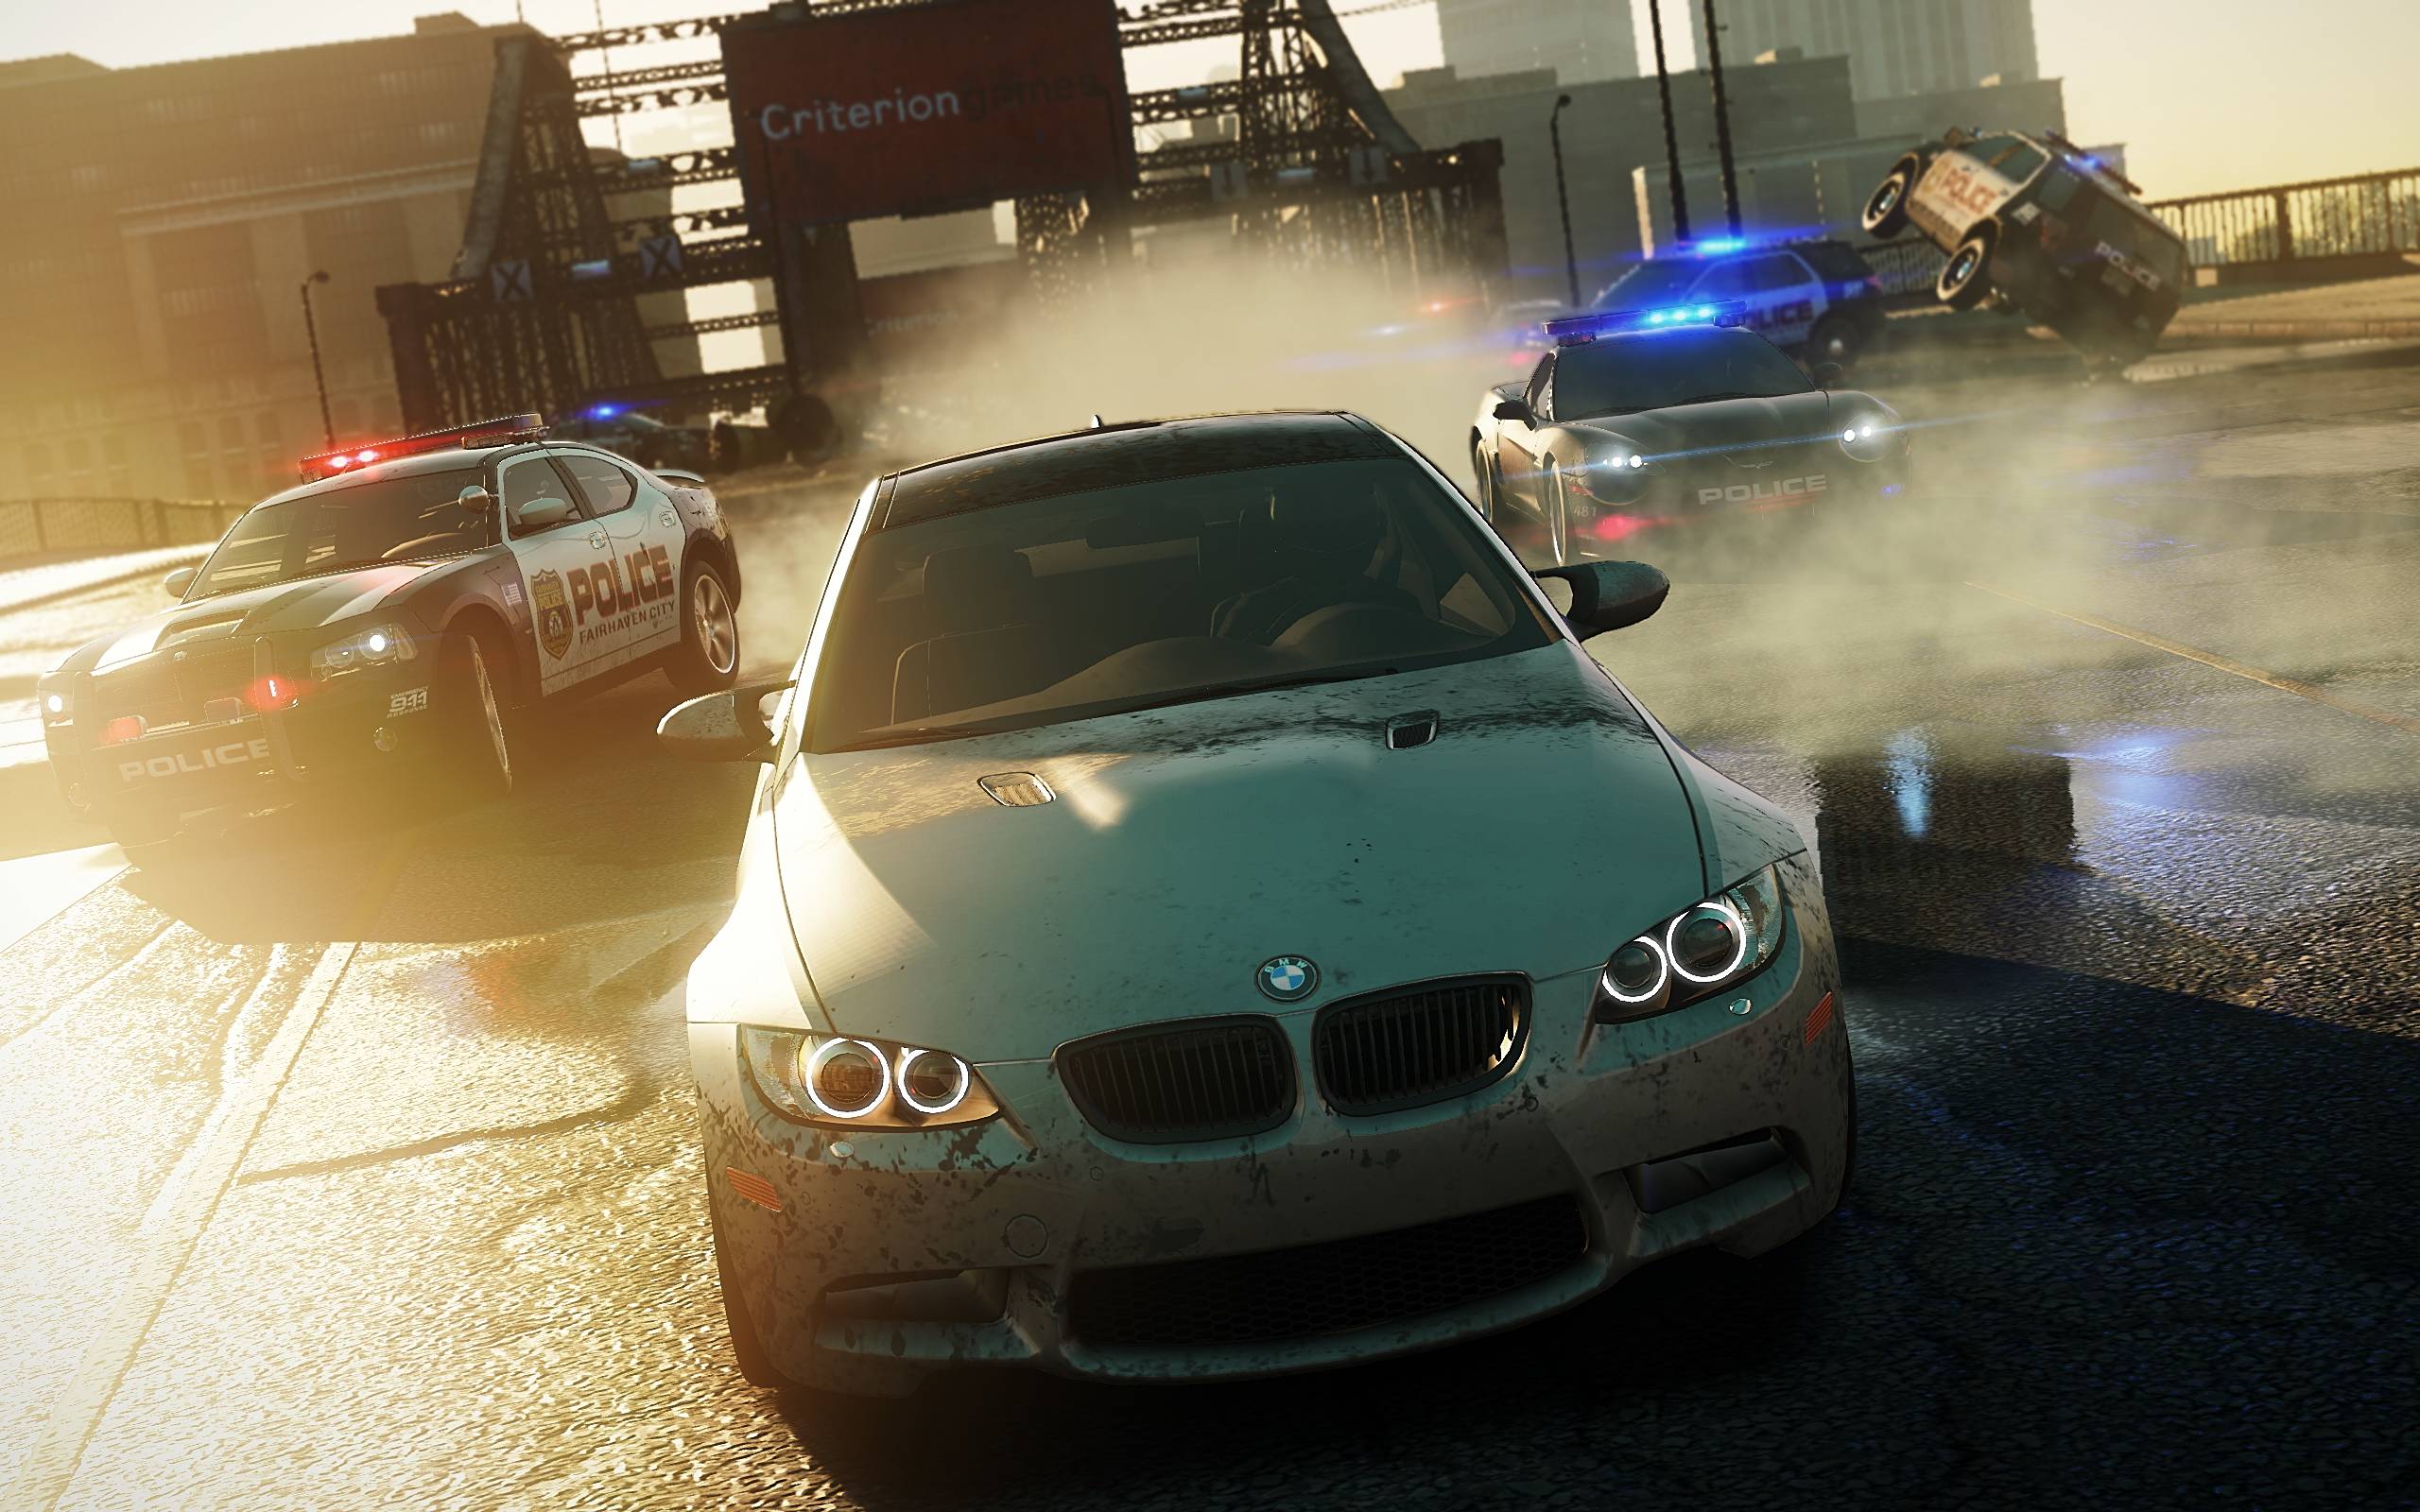 Nfs Most Wanted Wallpapers